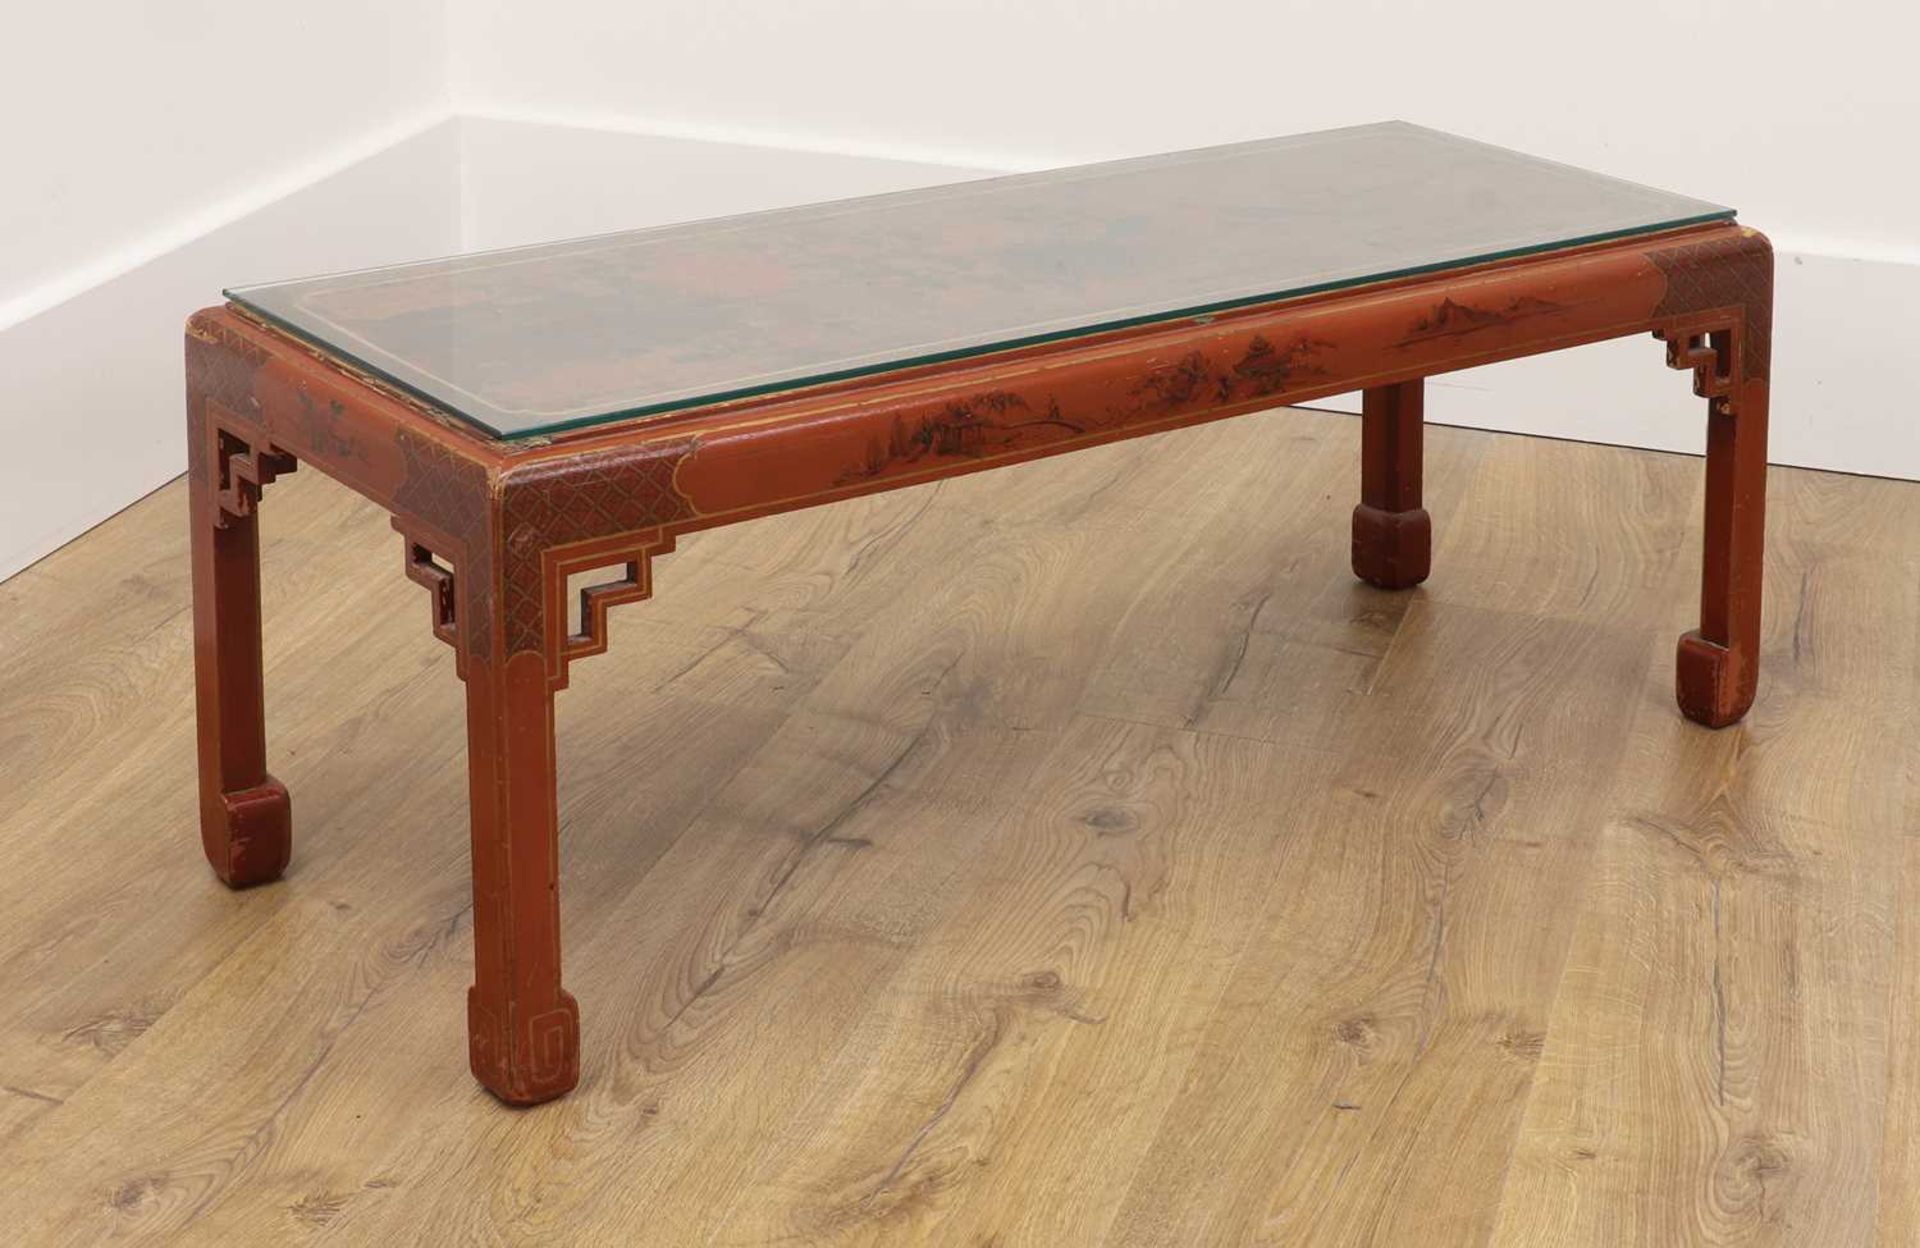 An 18th-century-style red lacquer low coffee table,